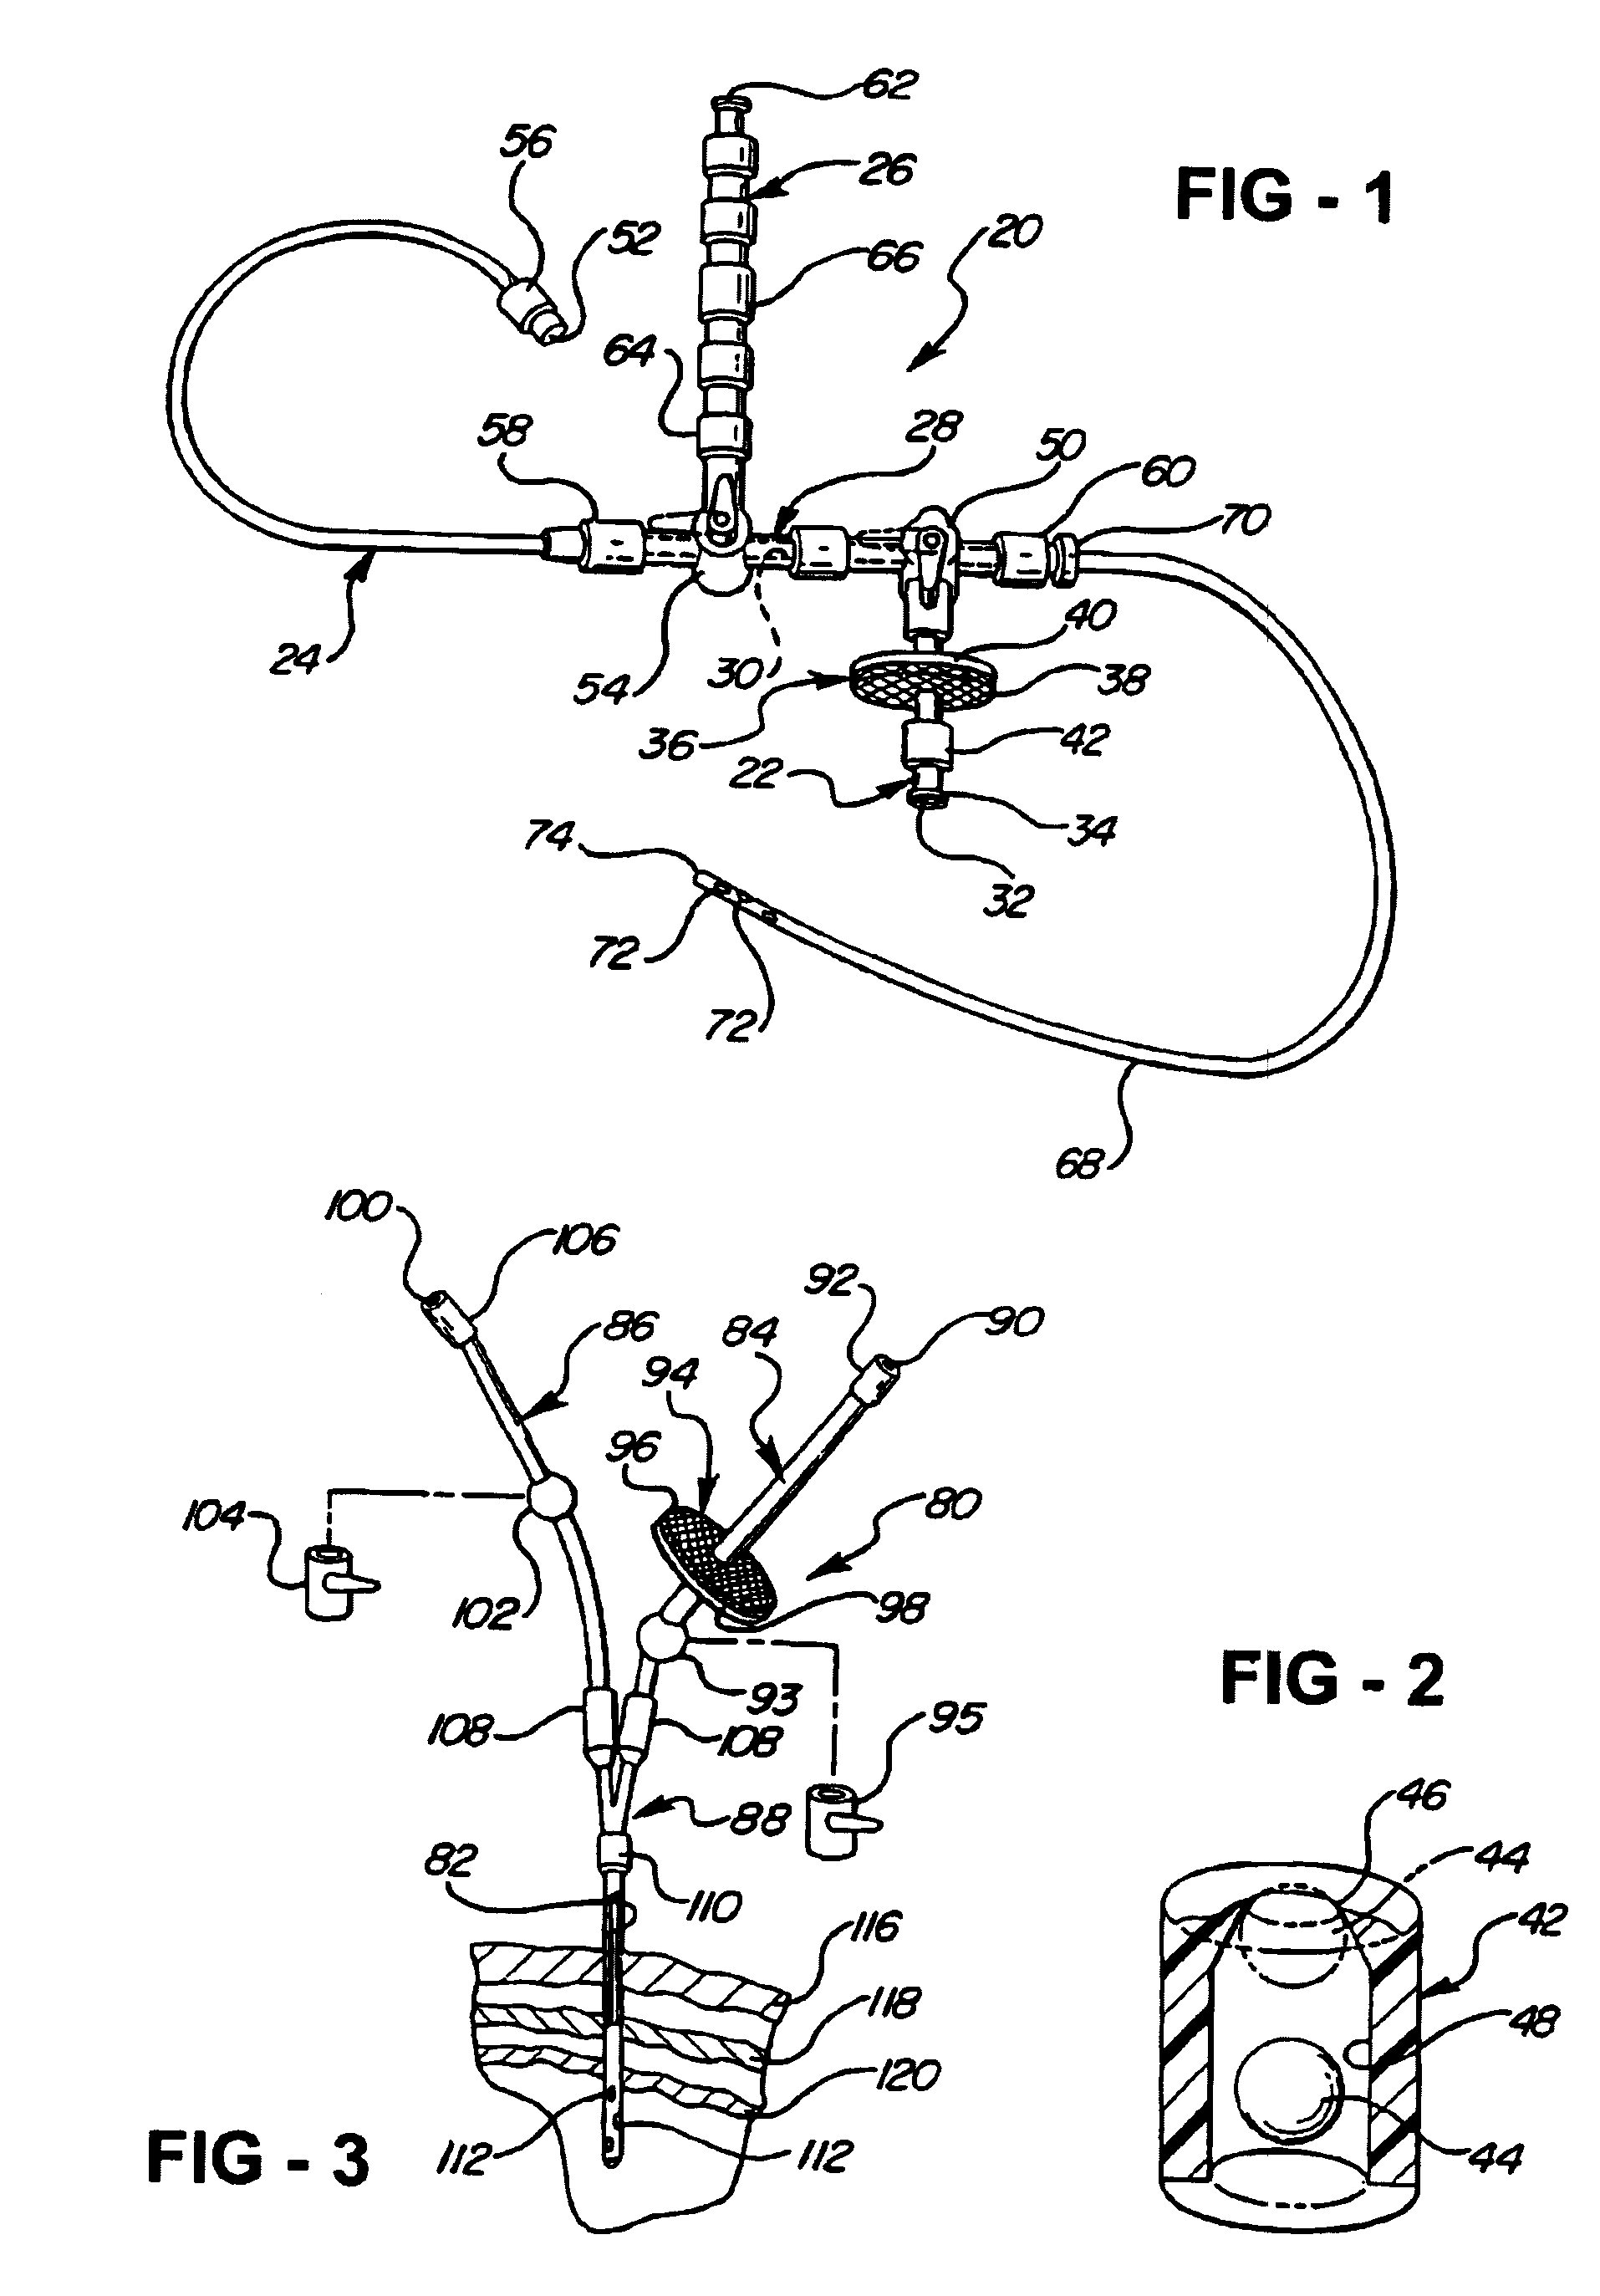 Direct central nervous system catheter and temperature control system